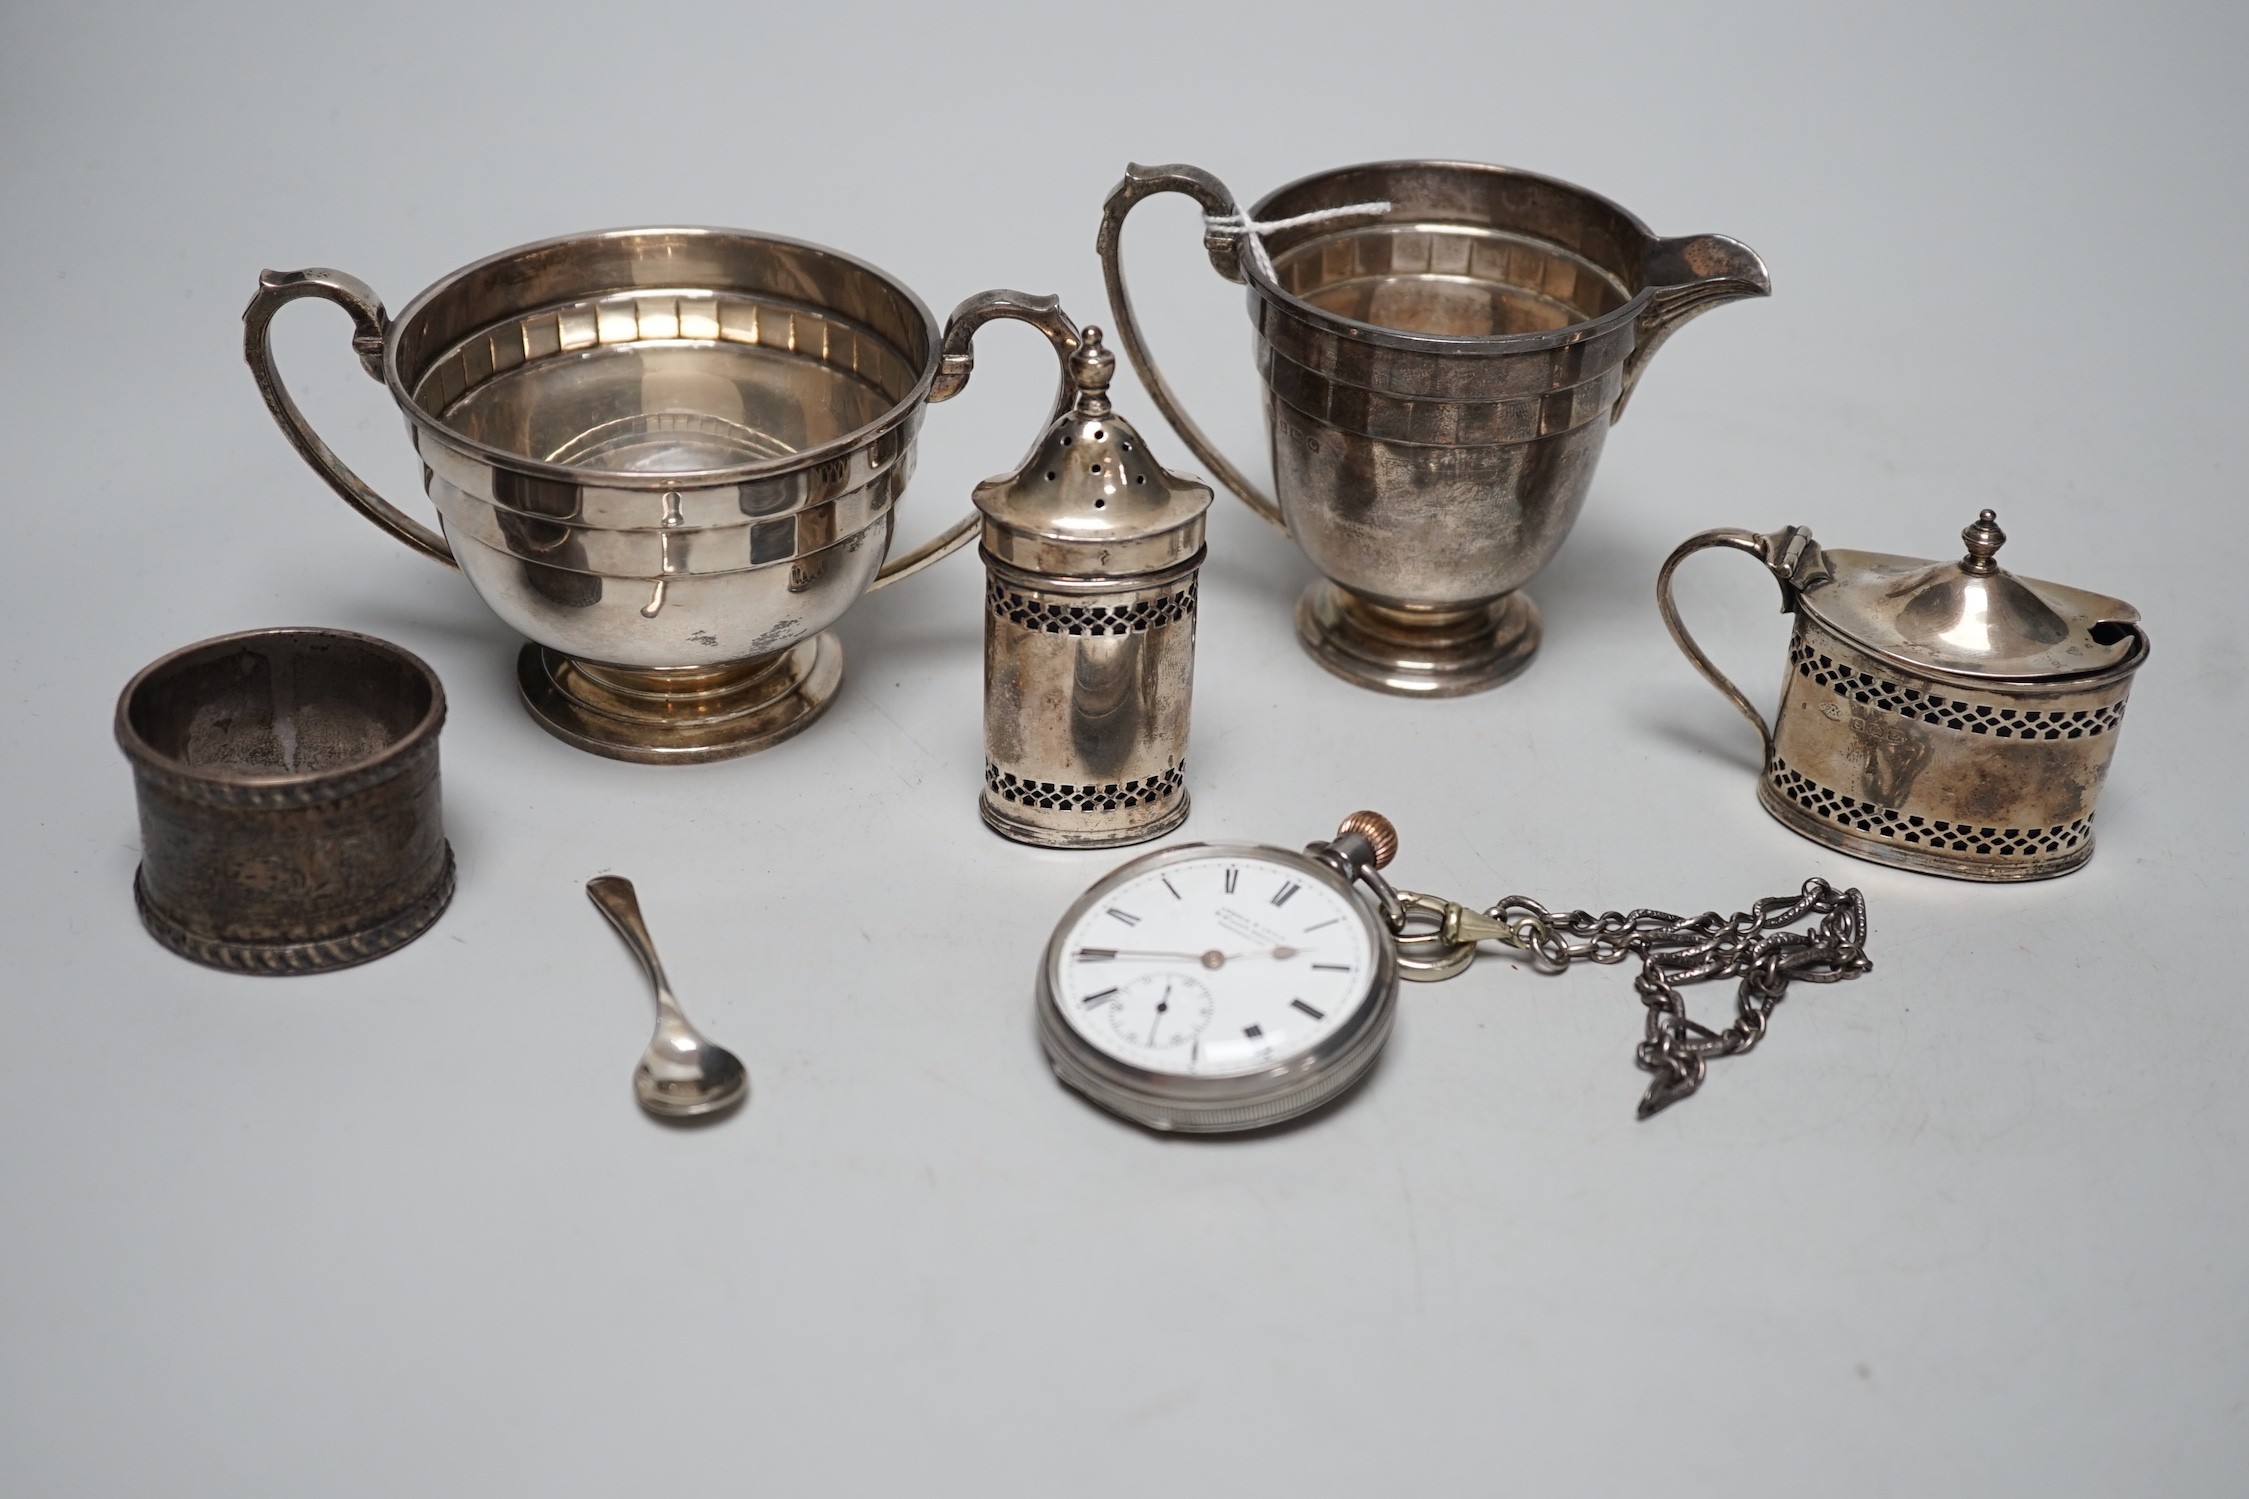 Small silverware, including a George V cream jug and matching sugar bowl, a mustard pot and matching pepper pot, silver serviette ring and a gentleman’s silver pocket watch and chain.                                     